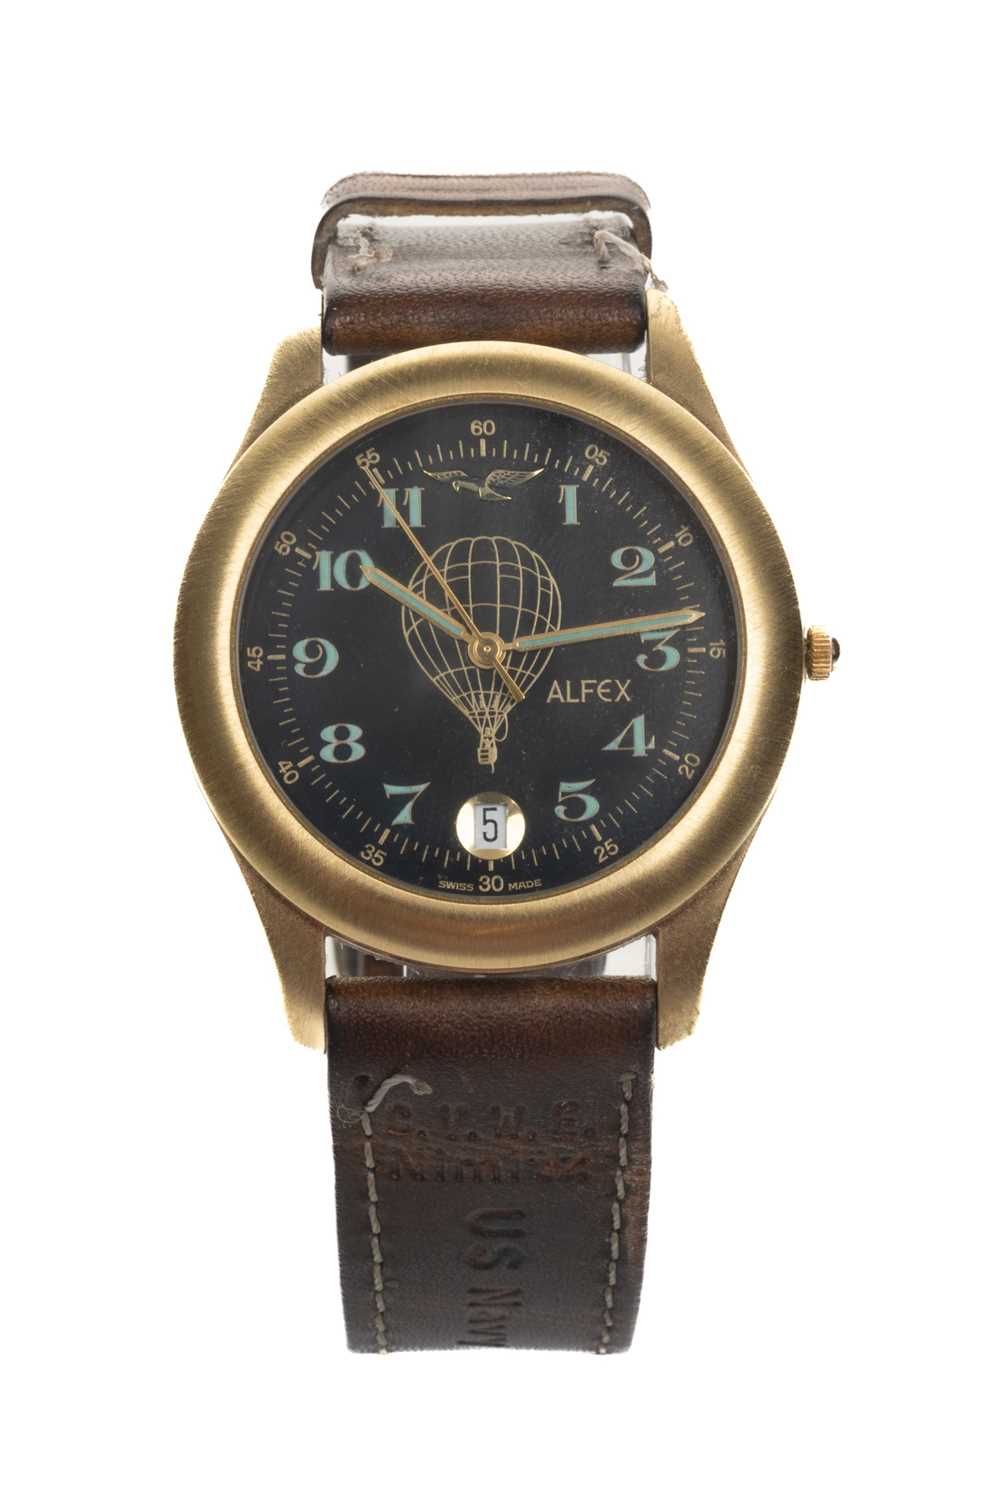 ALFEX OF SWITZERLAND US NAVY WRISTWATCH, the black dial with Arabic numerals, date aperture at 6 o'